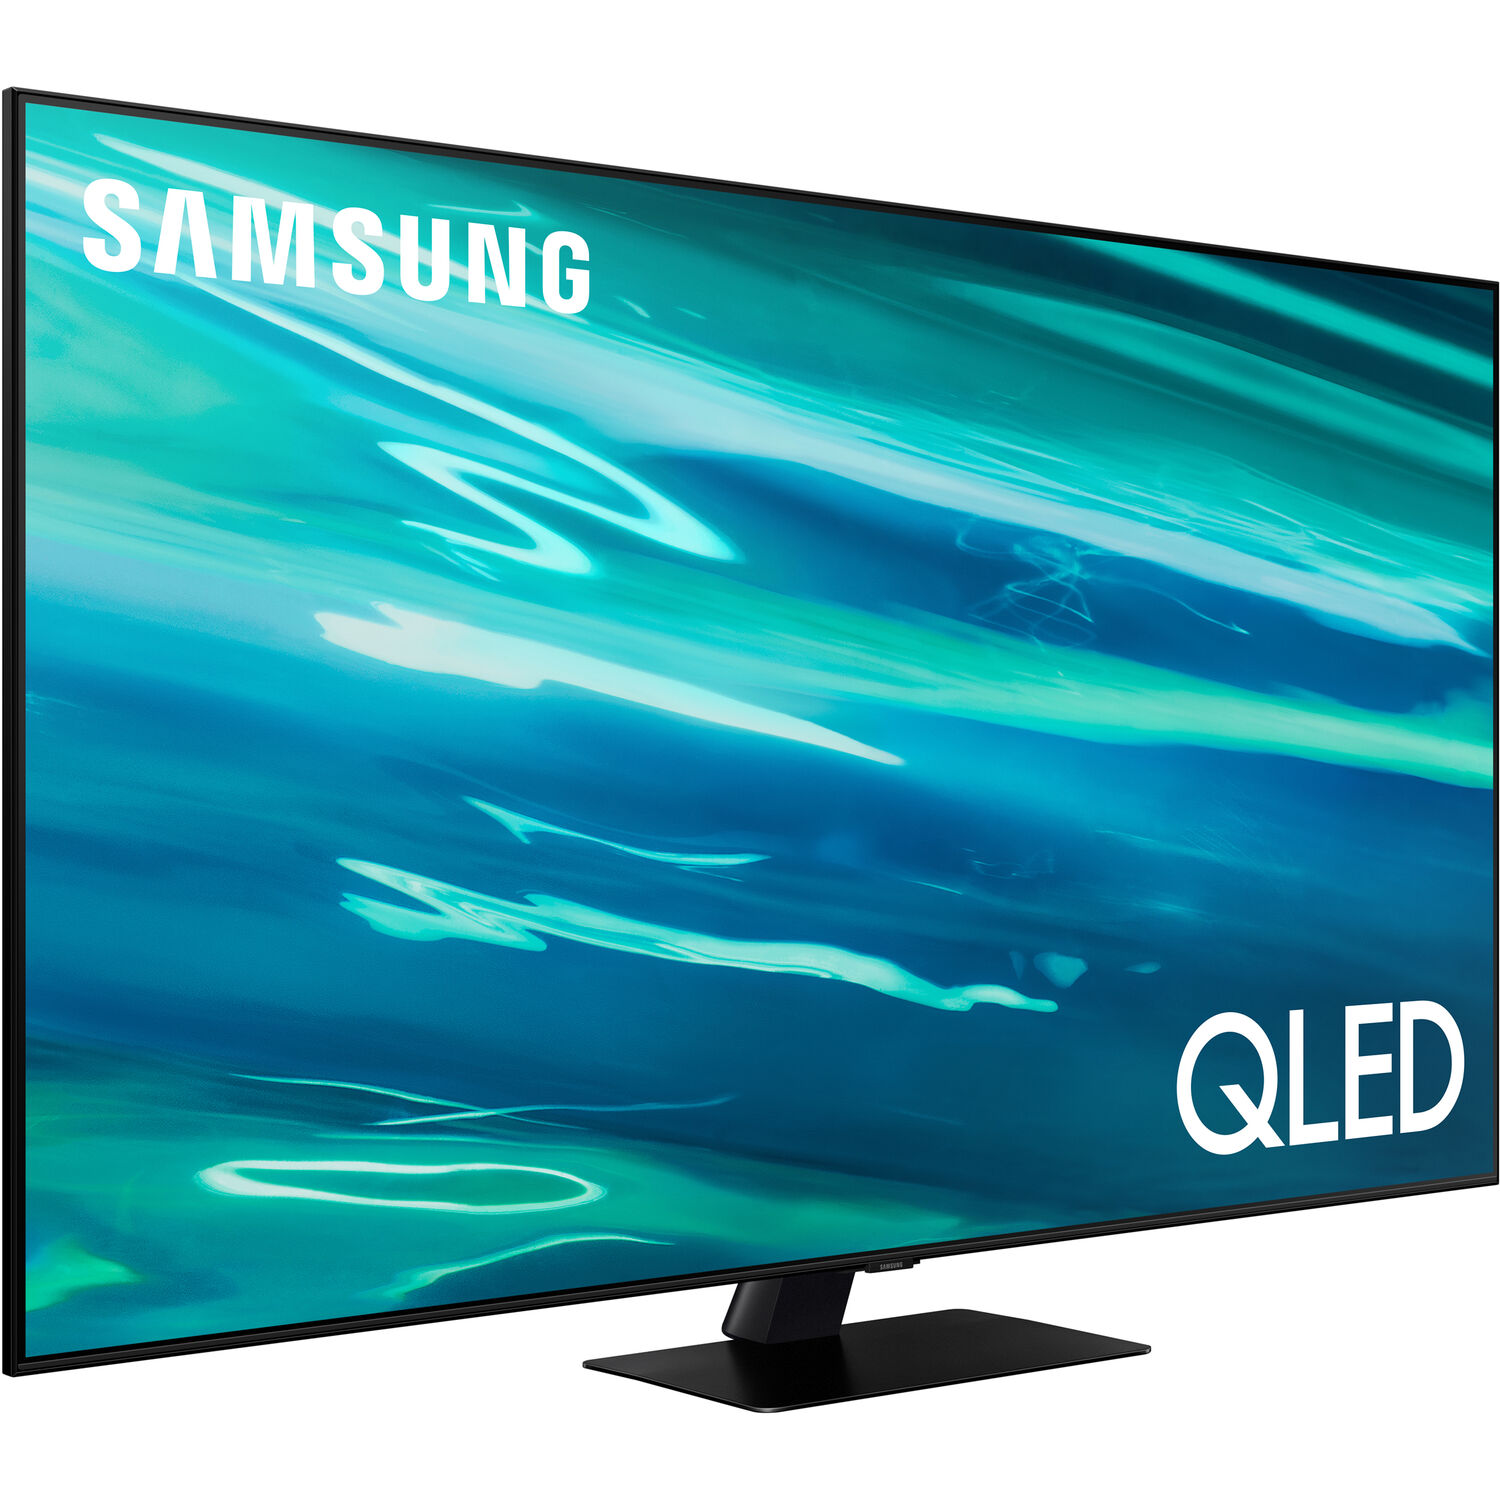 Samsung Q80A 75" Class HDR 4K UHD Smart QLED TV with $700 B&H e-gift card - was $1697.99.price now $1797.99.